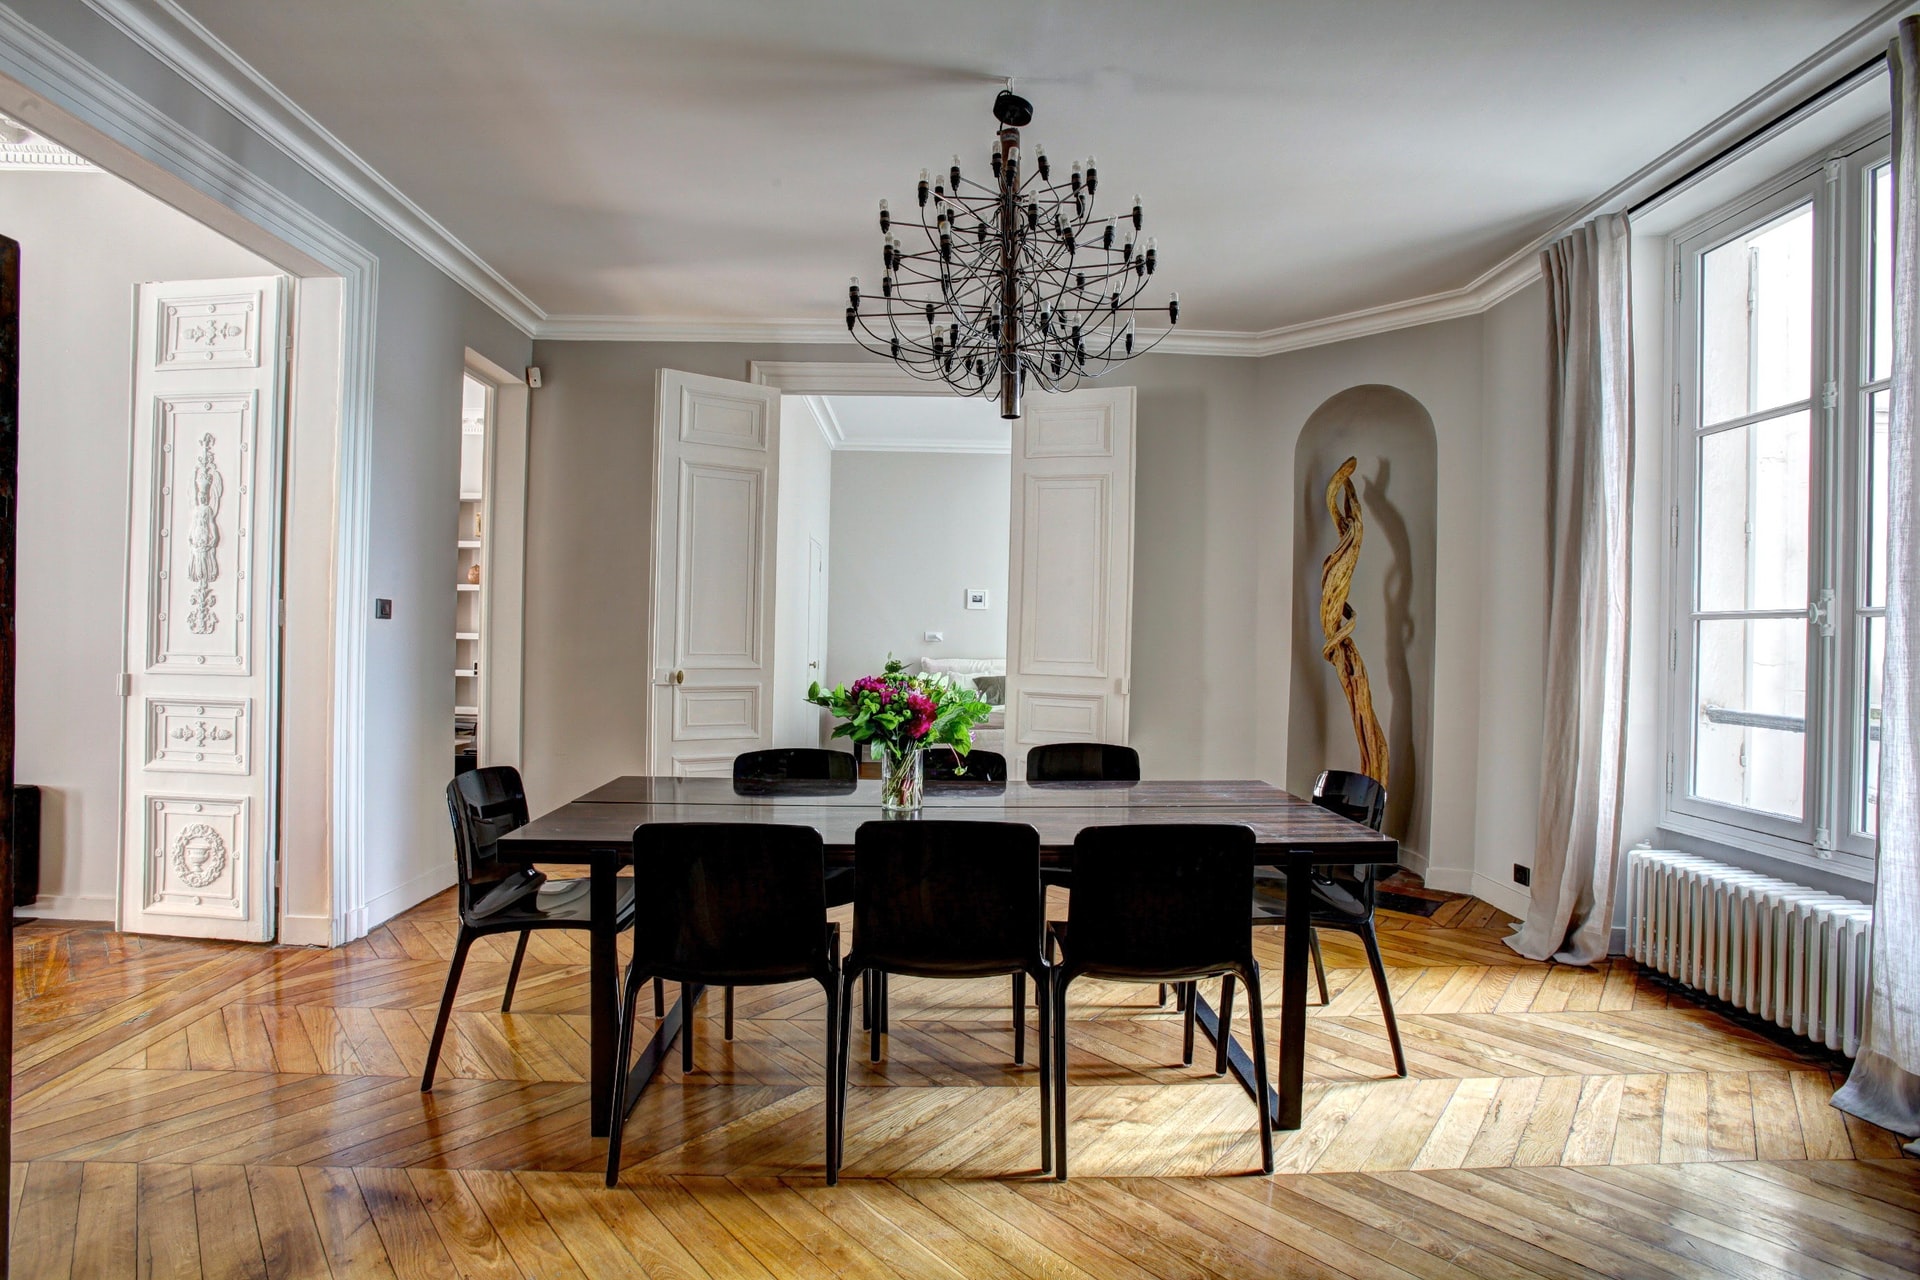 Where and How to Choose the Perfect Chandelier